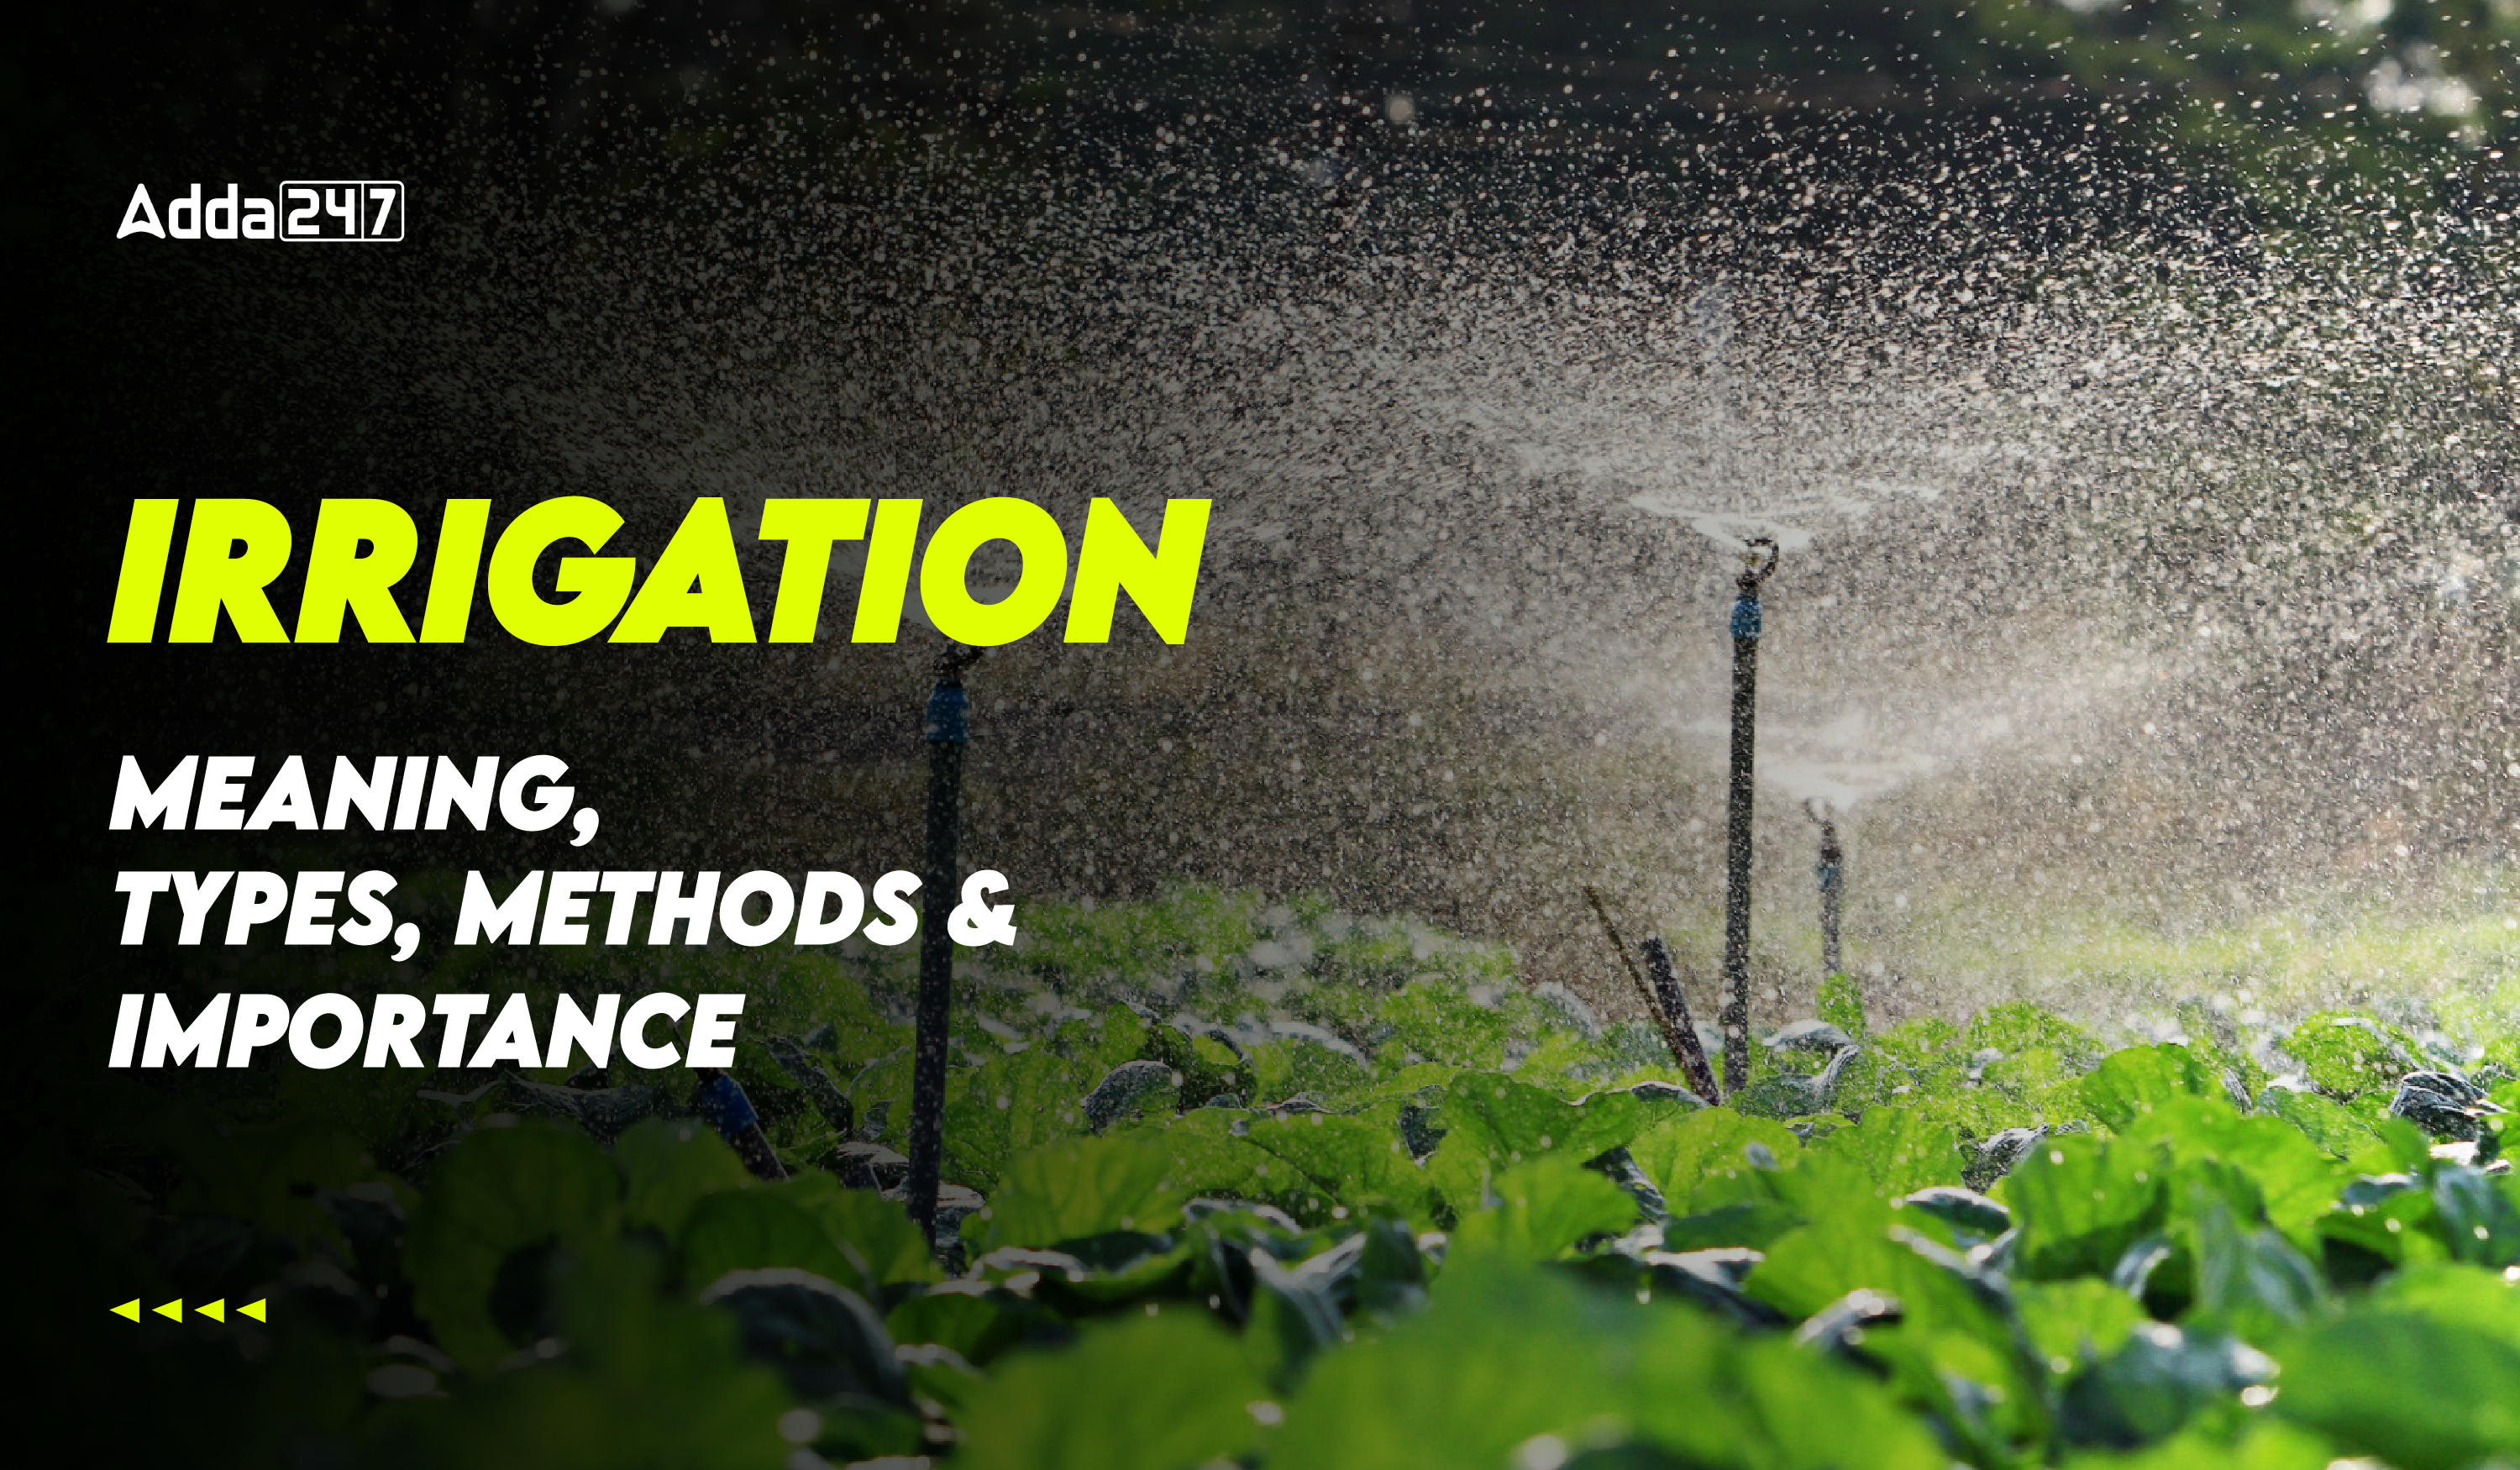 Irrigation Meaning, Types, Methods and Importance